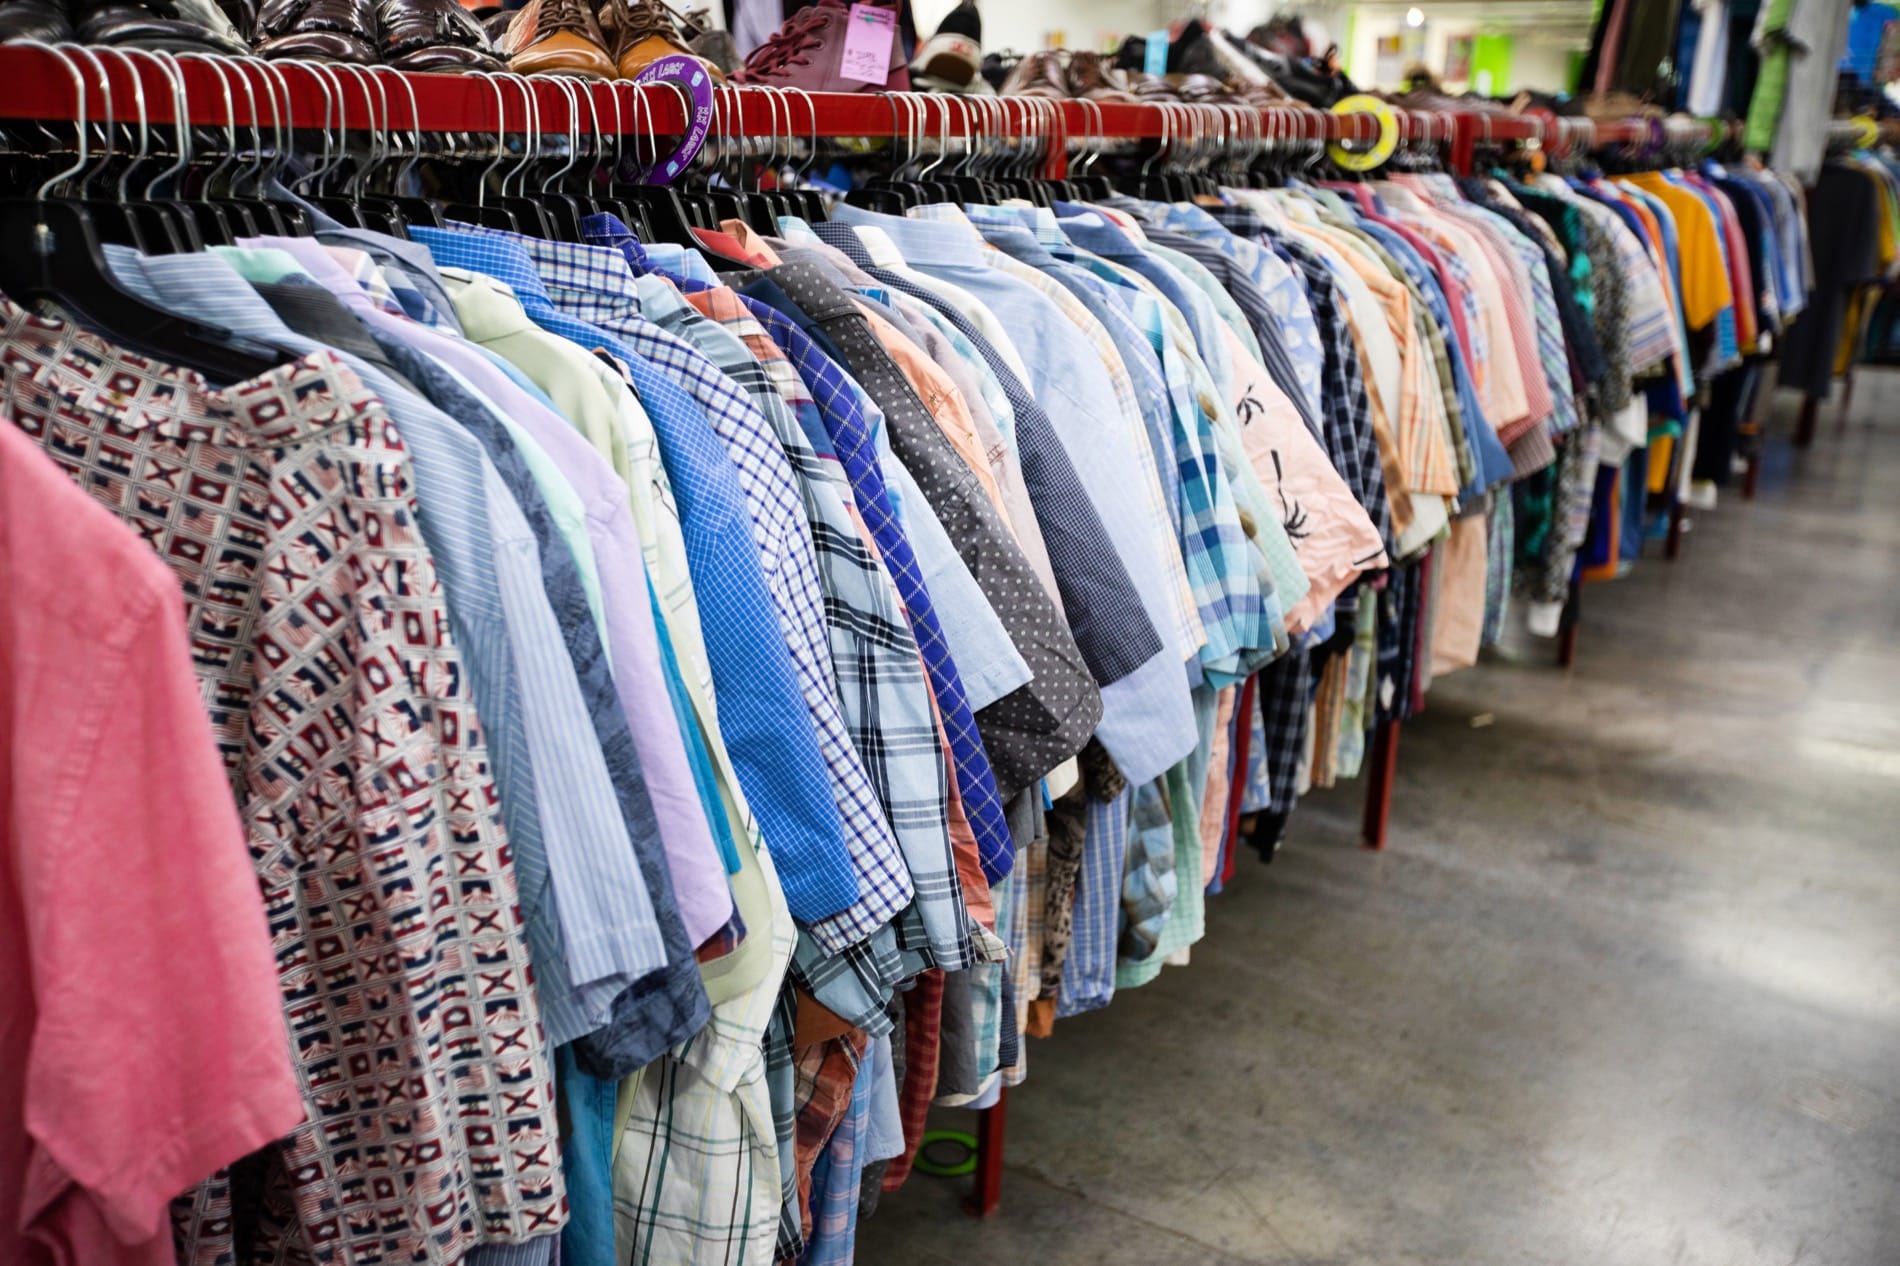 Kansas City Second Hand Stores: Best Thrift Stores in KC: Red Racks